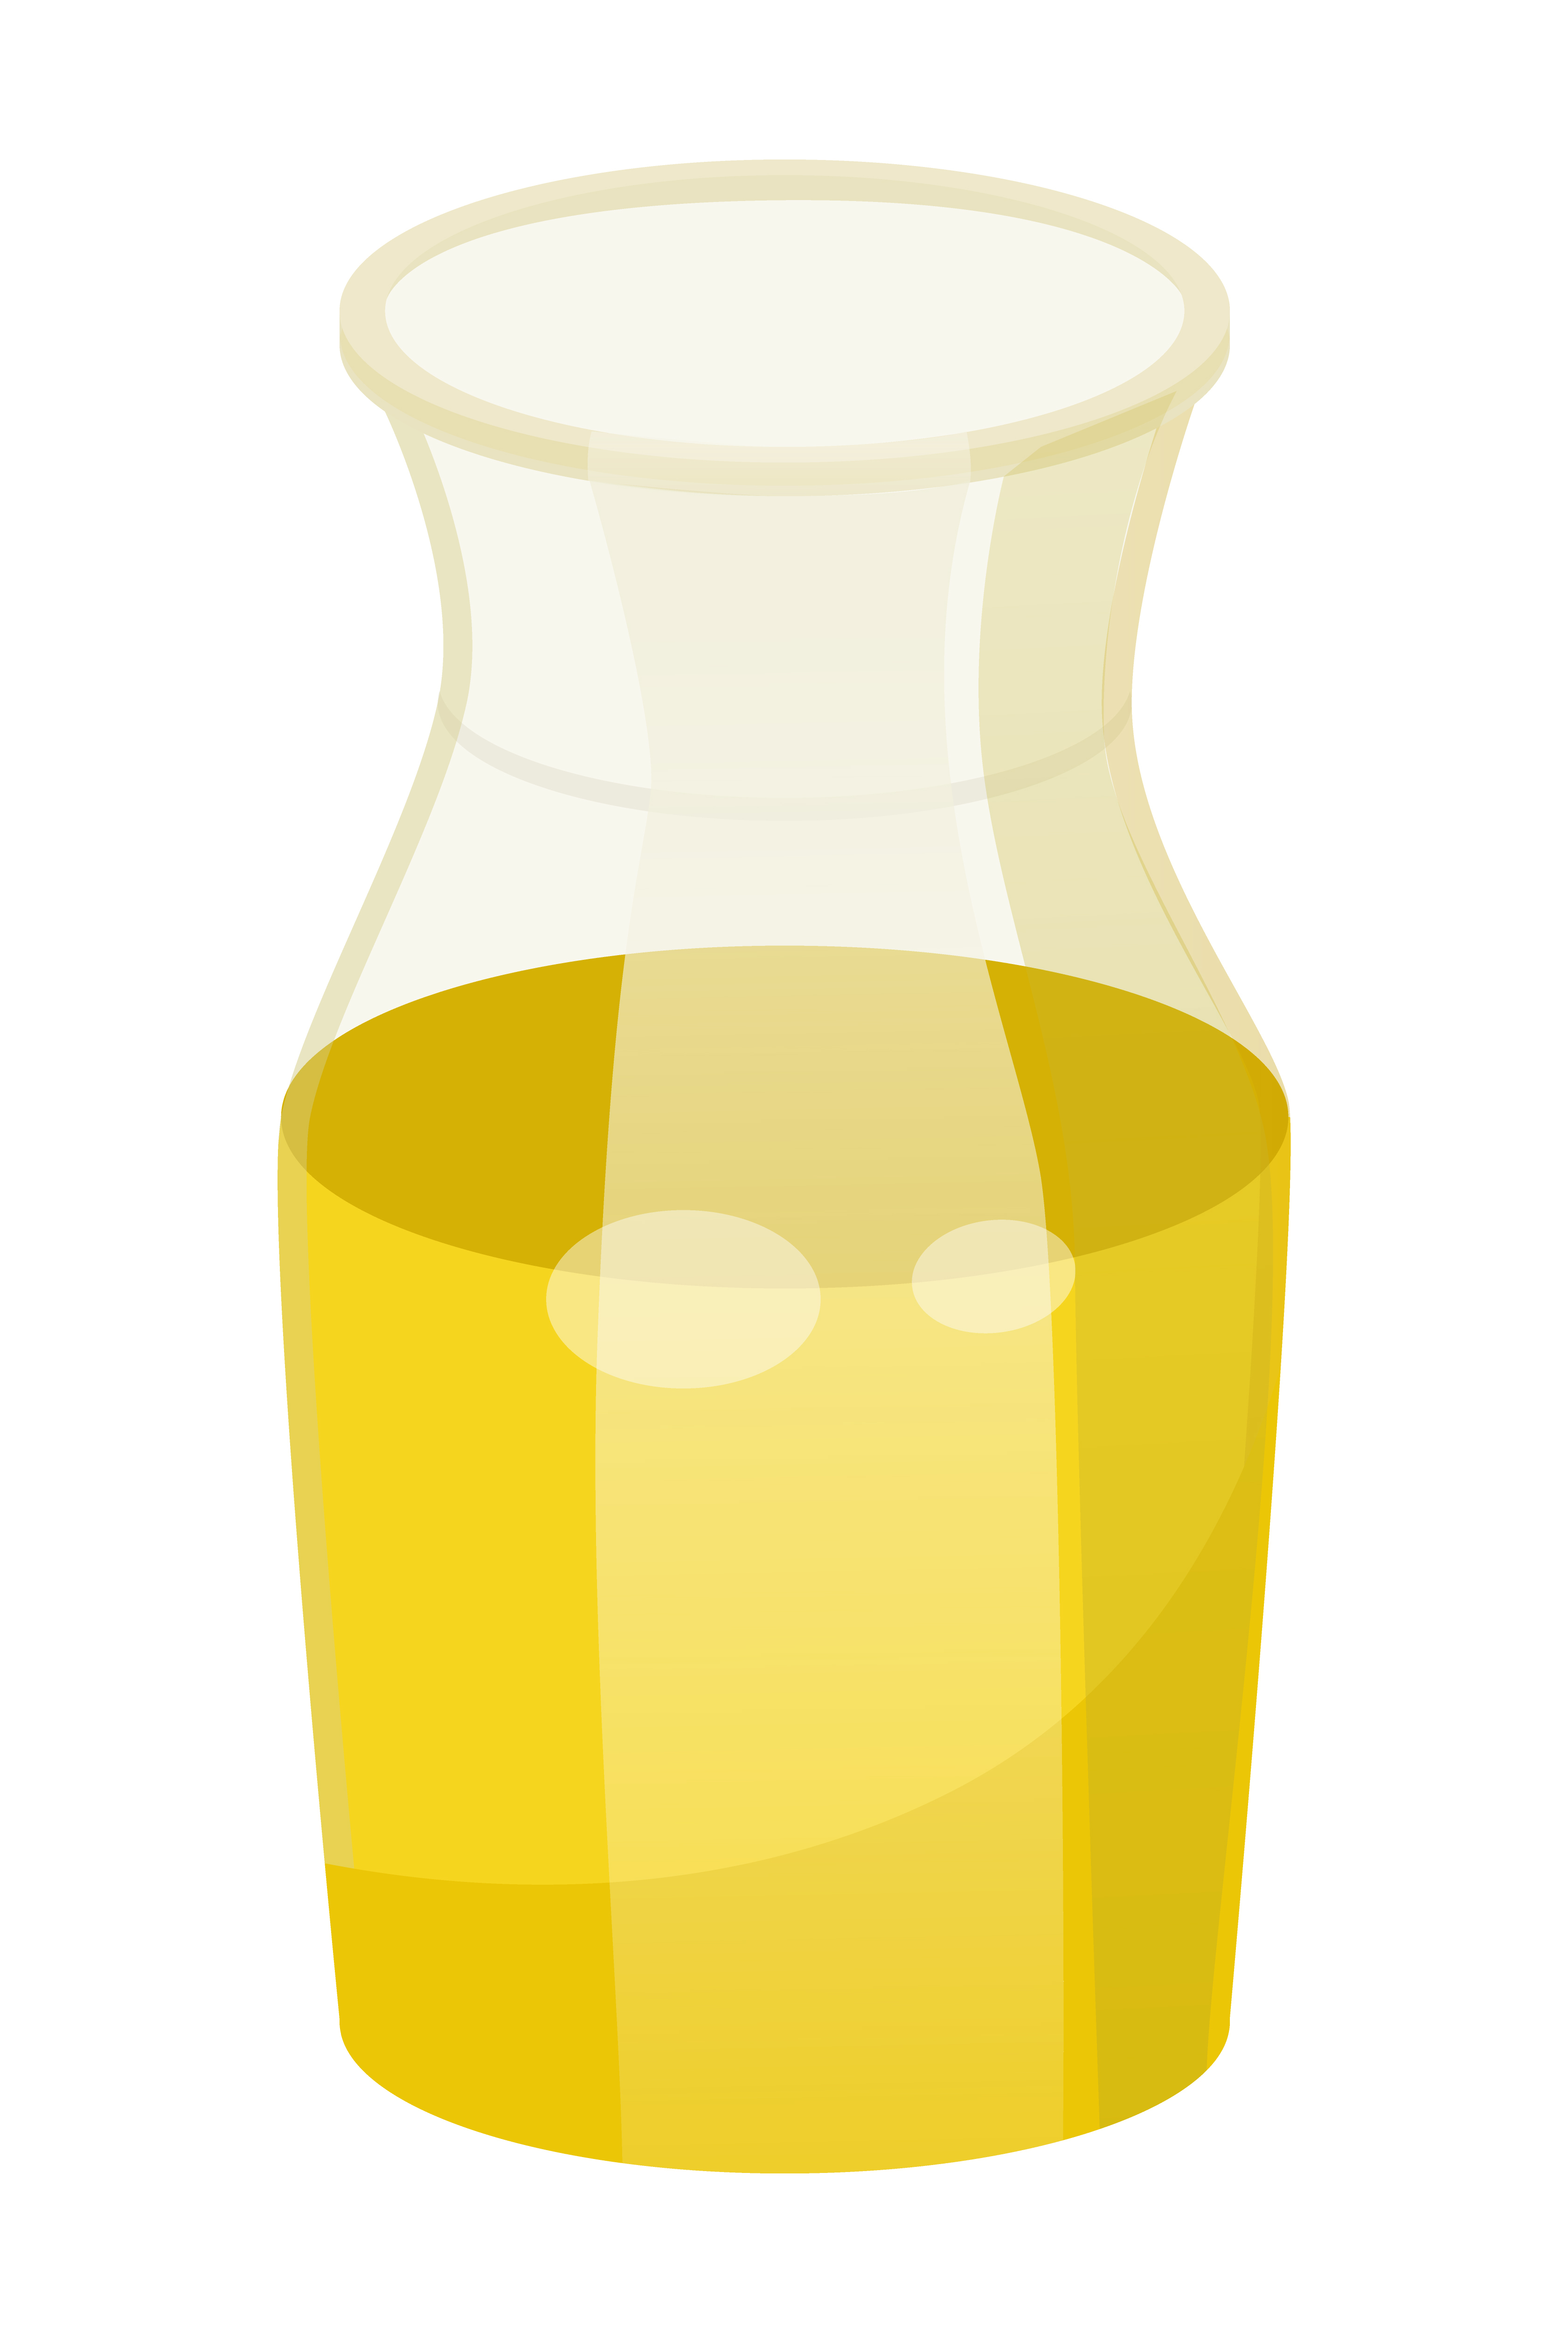 Glass pot contains golden liquid inside. Vessel with viscous substance used in cooking and cosmetics. Vegetable, olive or sunflower, oil good for hairs. Vector illustration of haircare in flat style. Golden Oil, Liquid Used in Cooking and Cosmetics